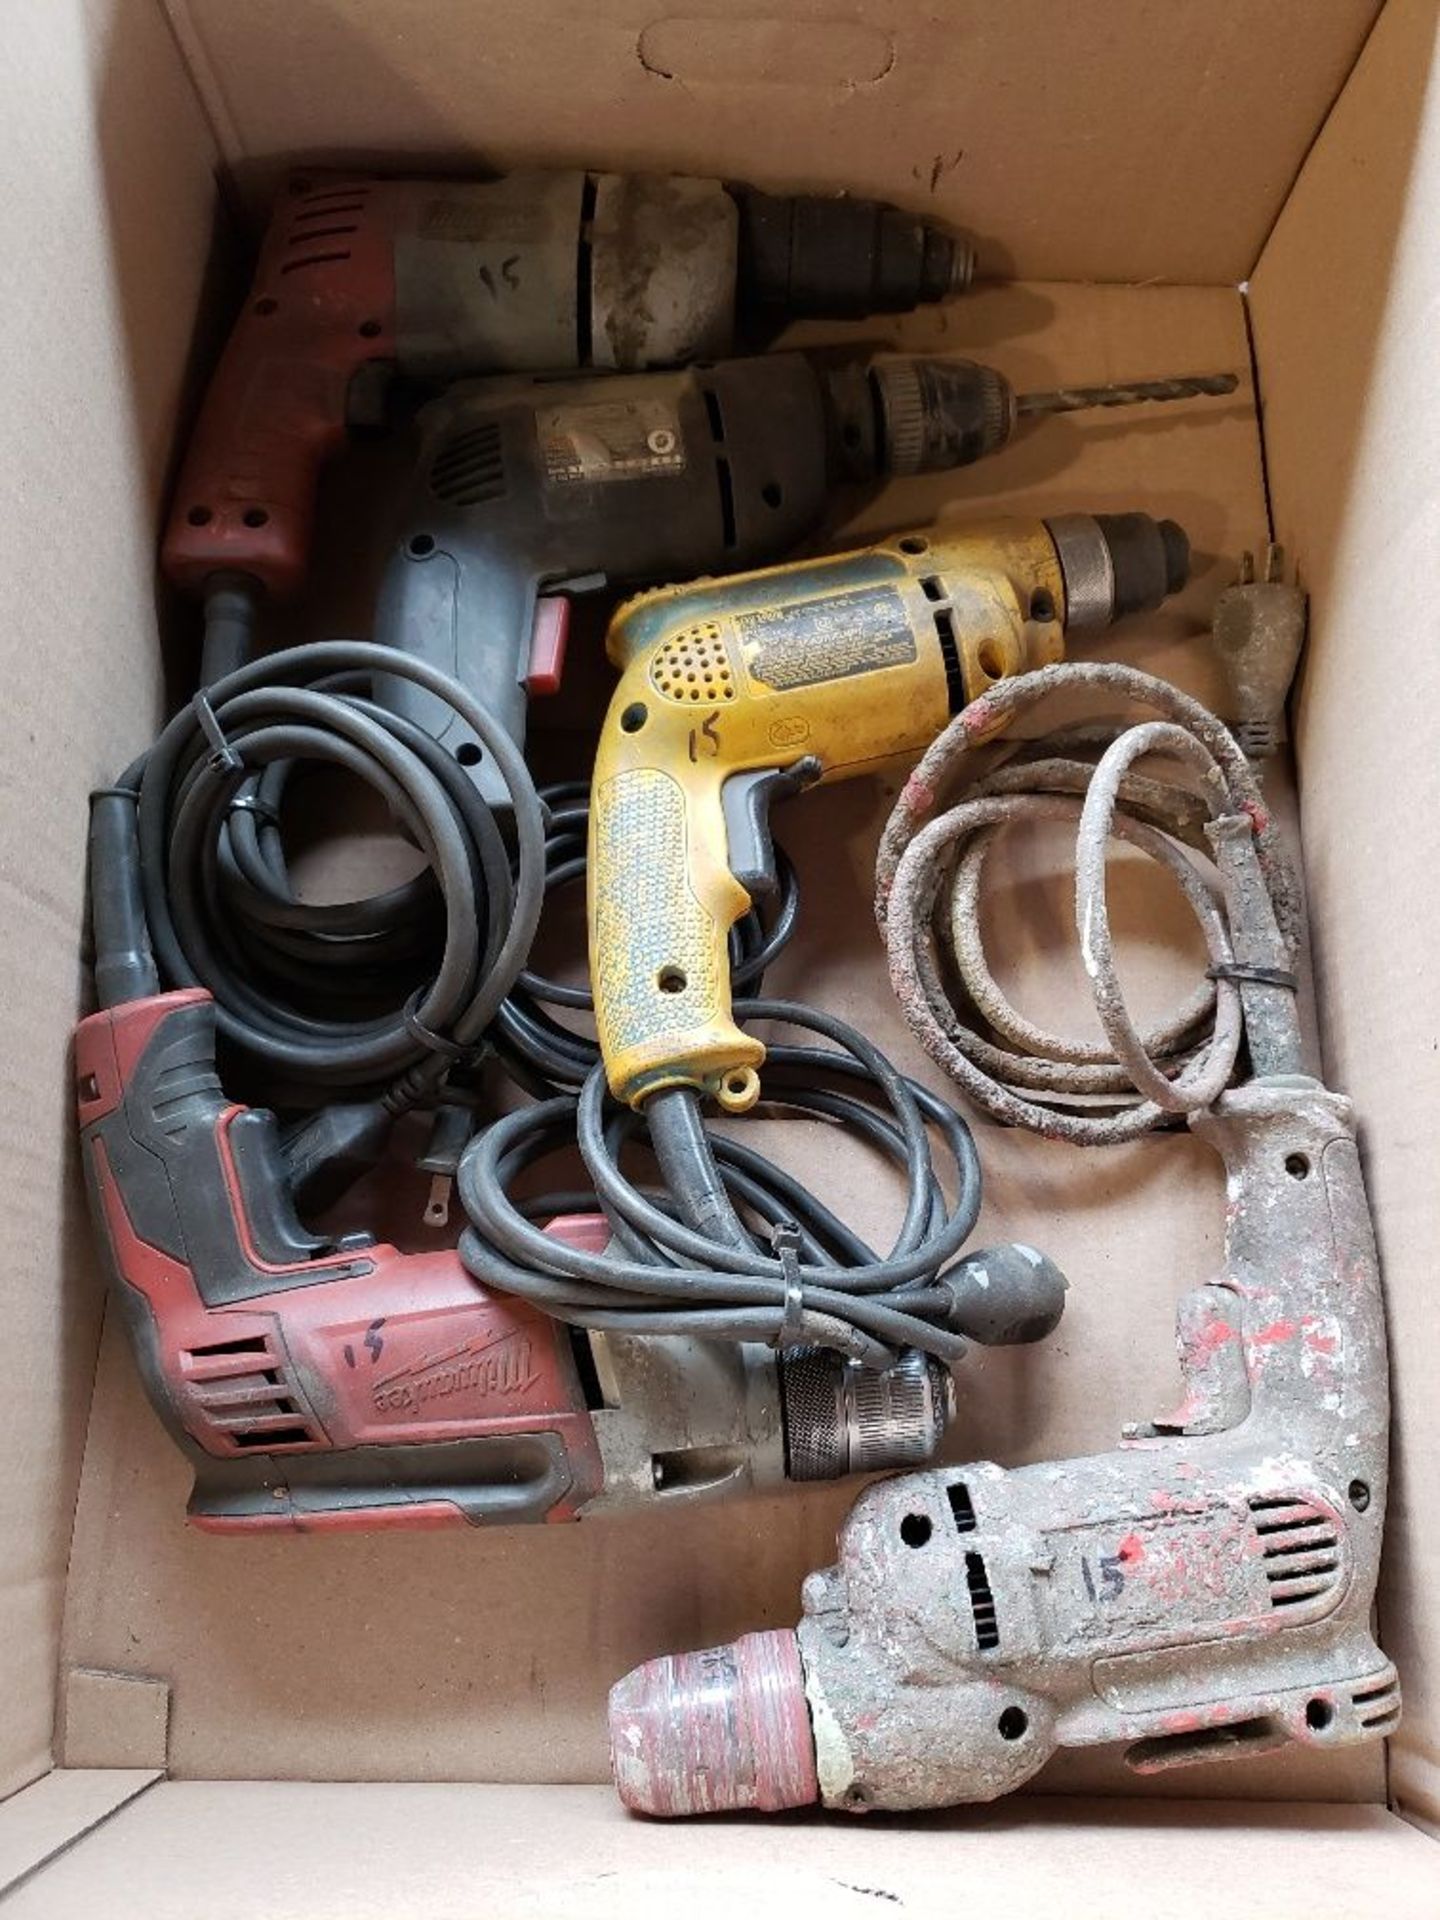 MISCELLANEOUS ELECTRIC SCREWDRIVERS AND DRILLS